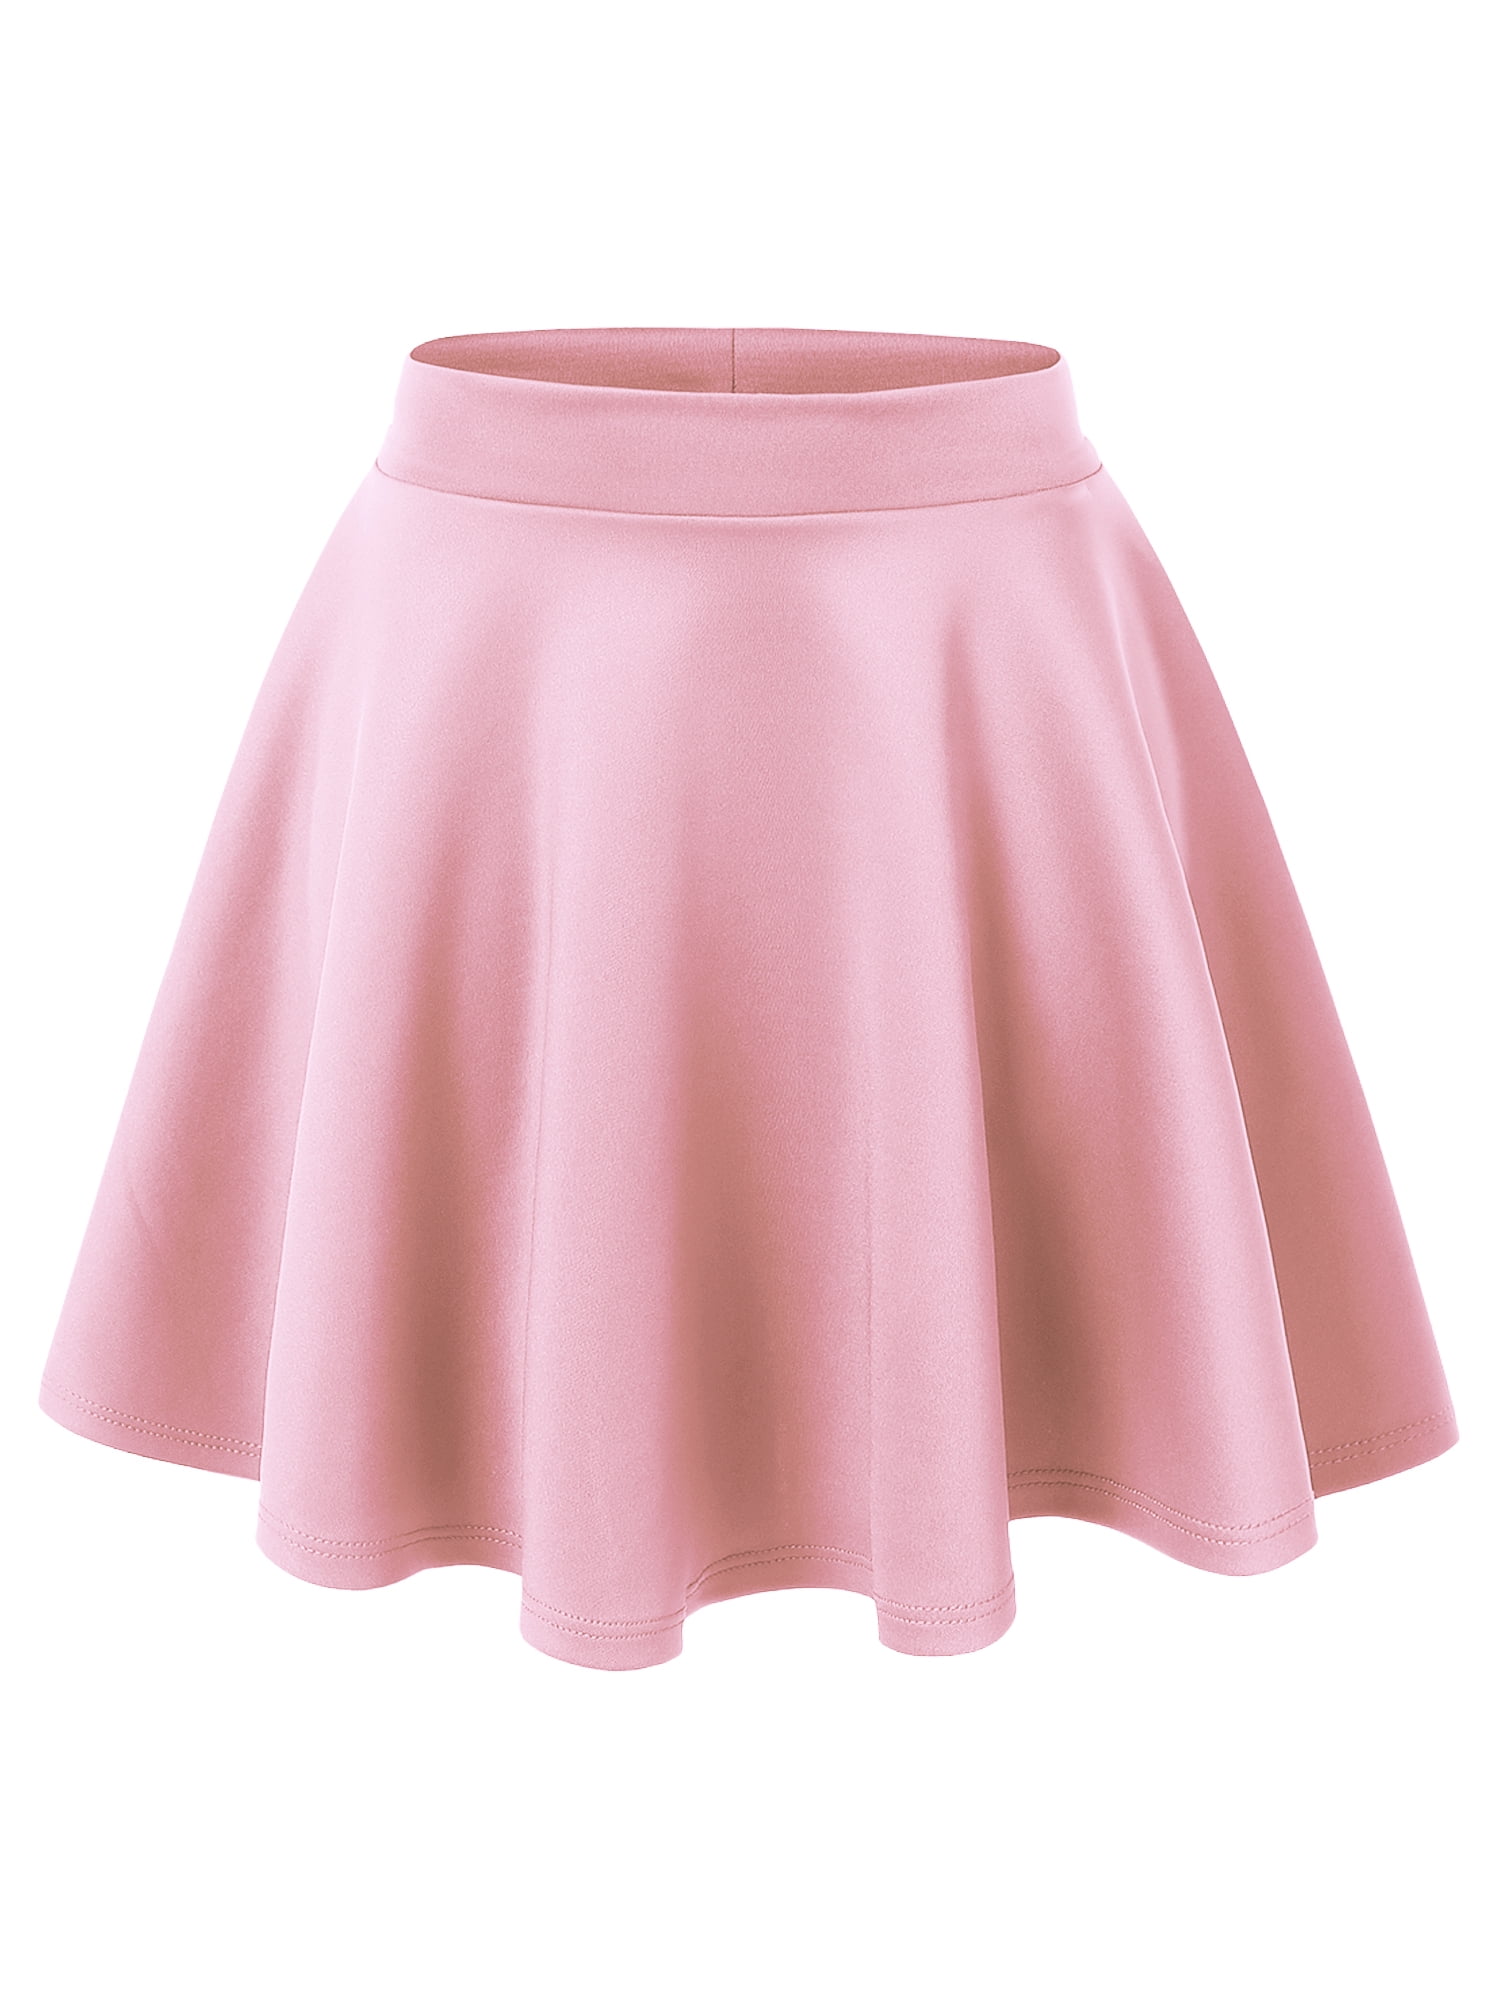 Made by Johnny Women's Basic Versatile Stretchy Flared Skater Skirt XS PINK